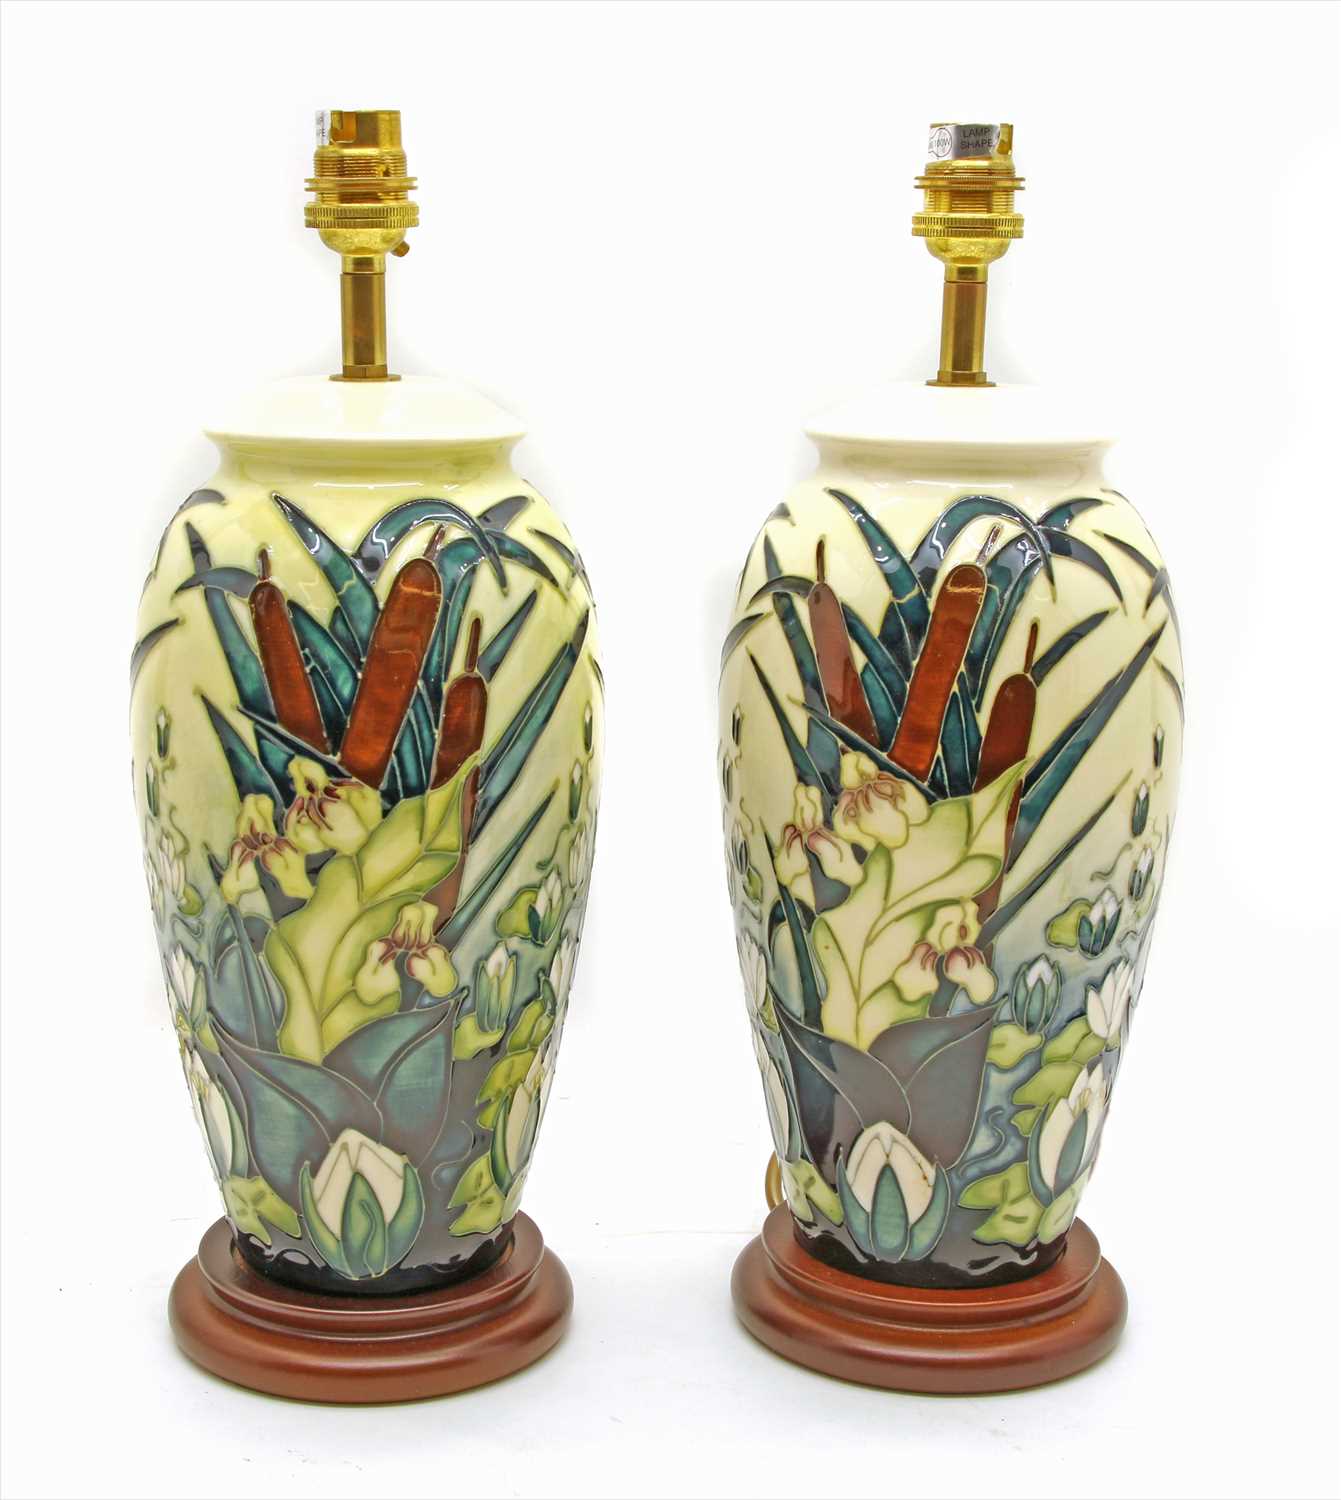 Lot 456 - A pair of modern Moorcroft table lamps